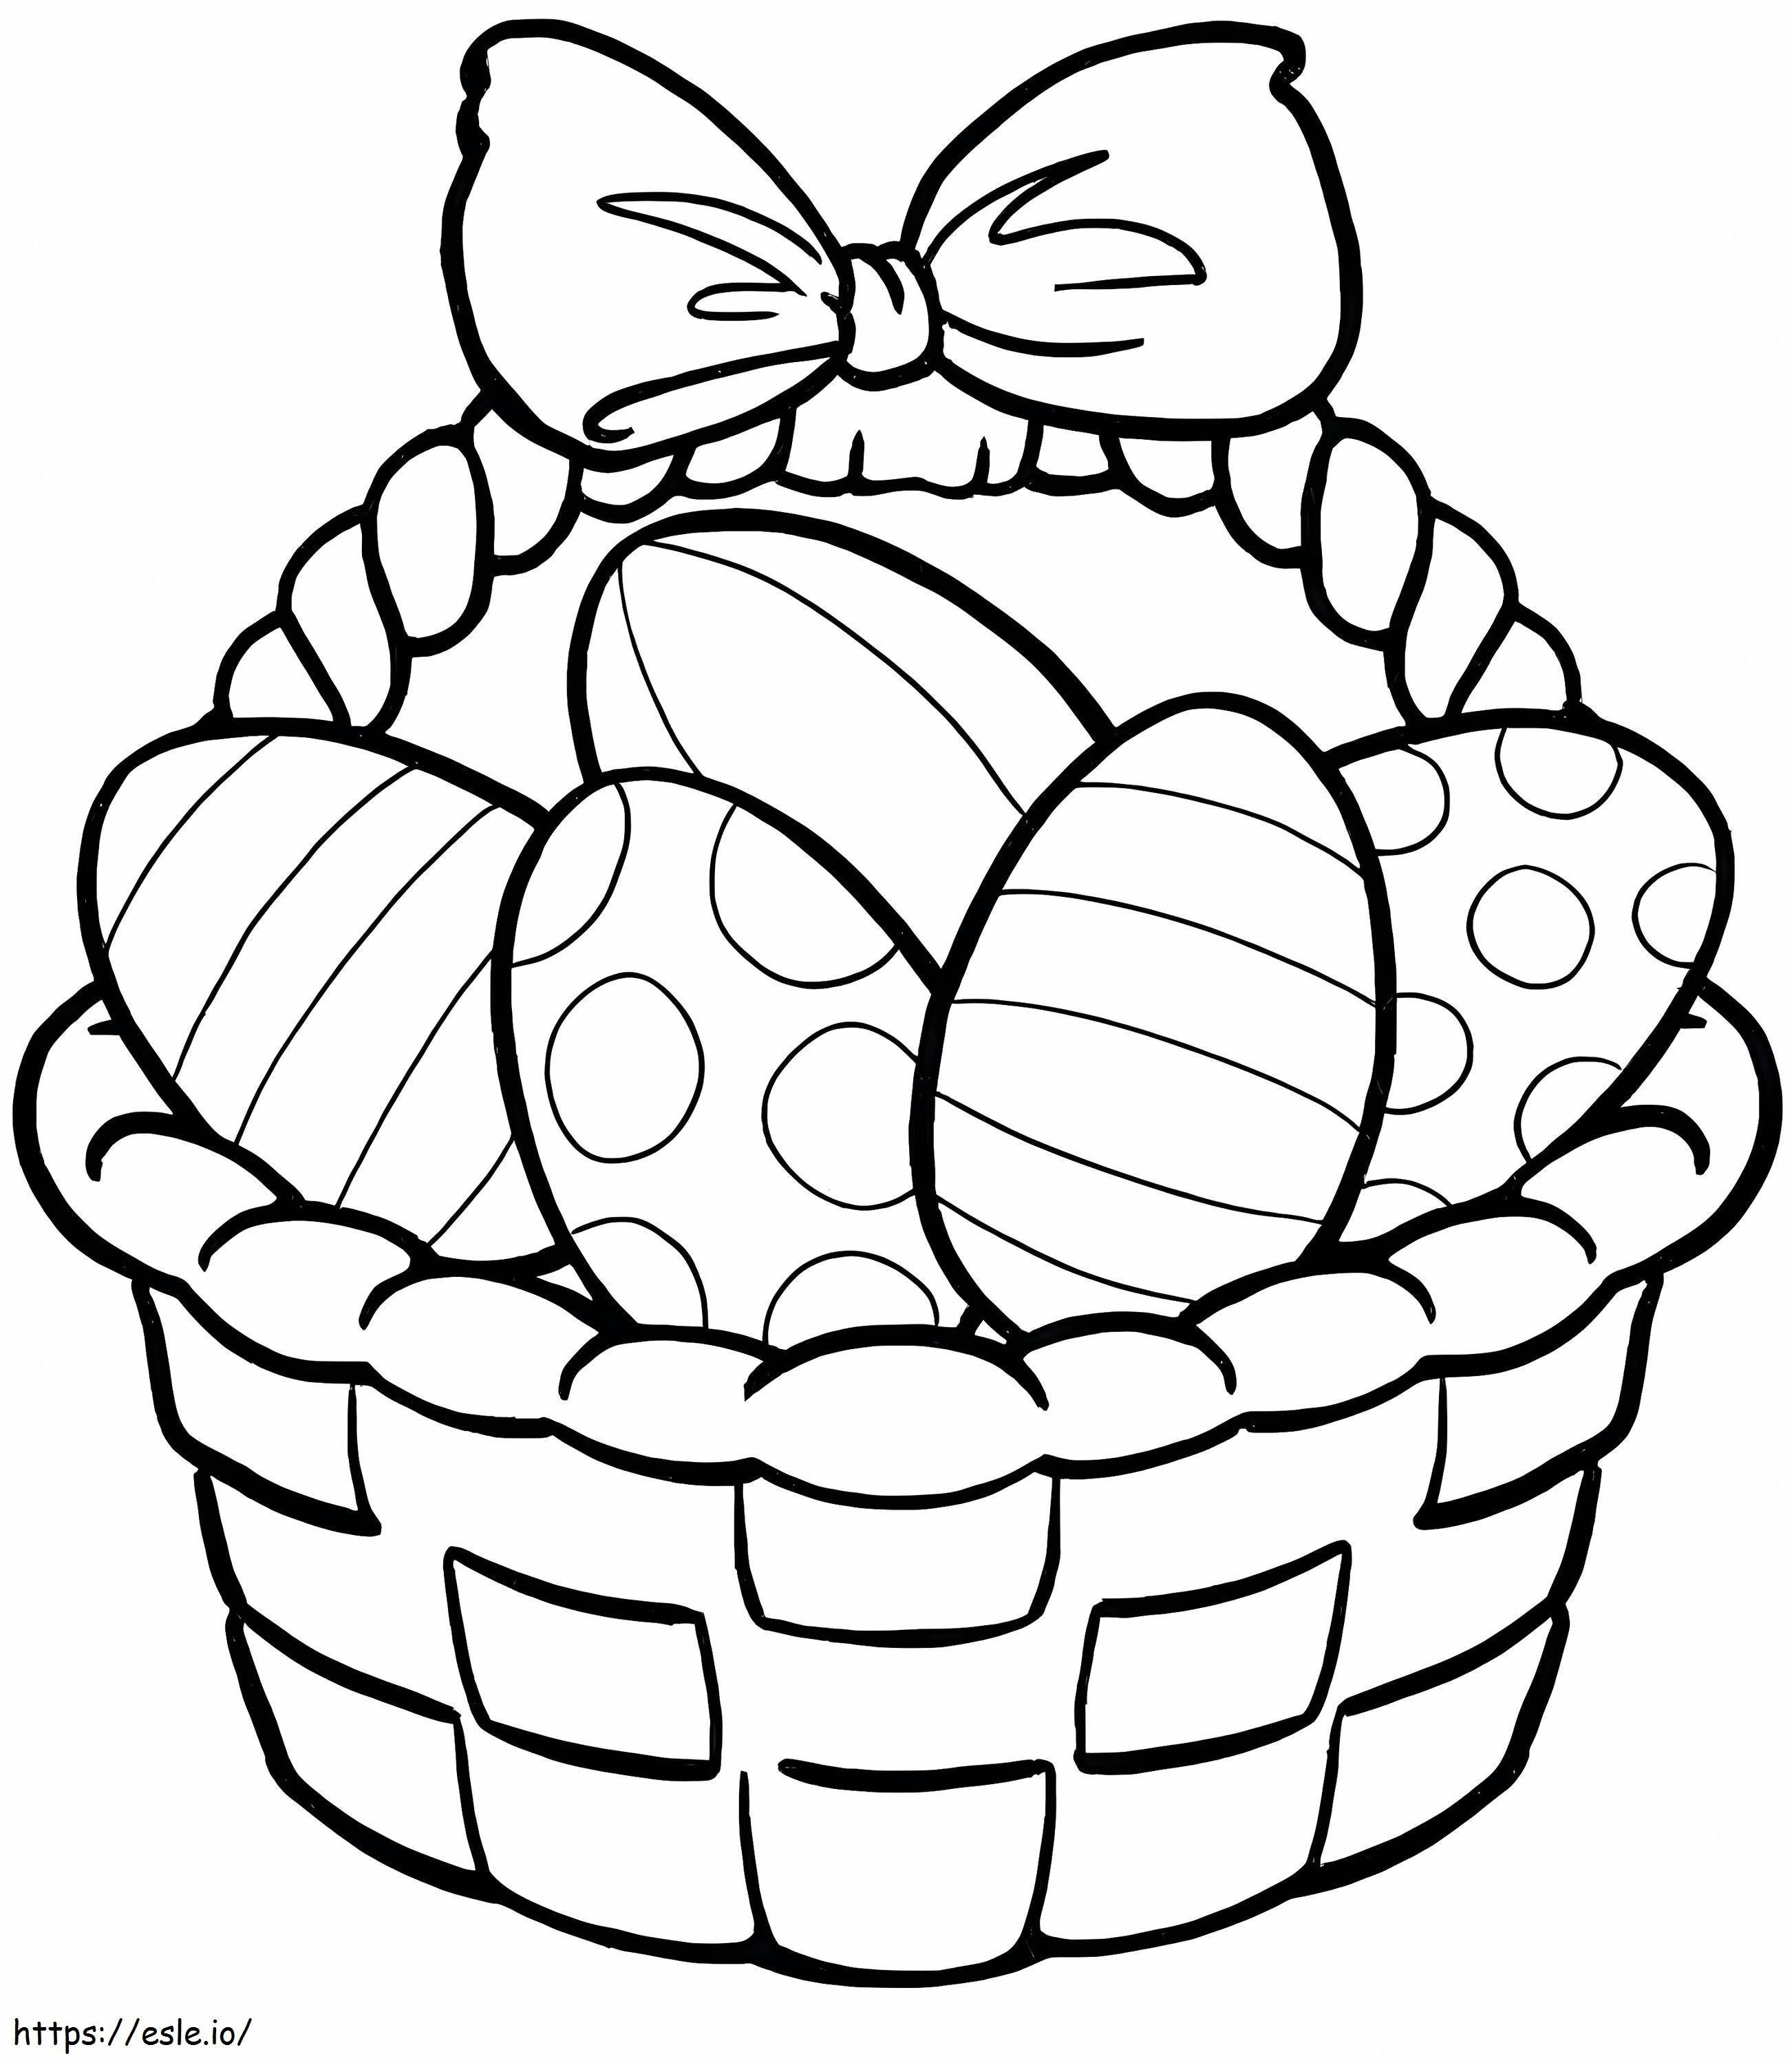 Easter Basket Eggs coloring page